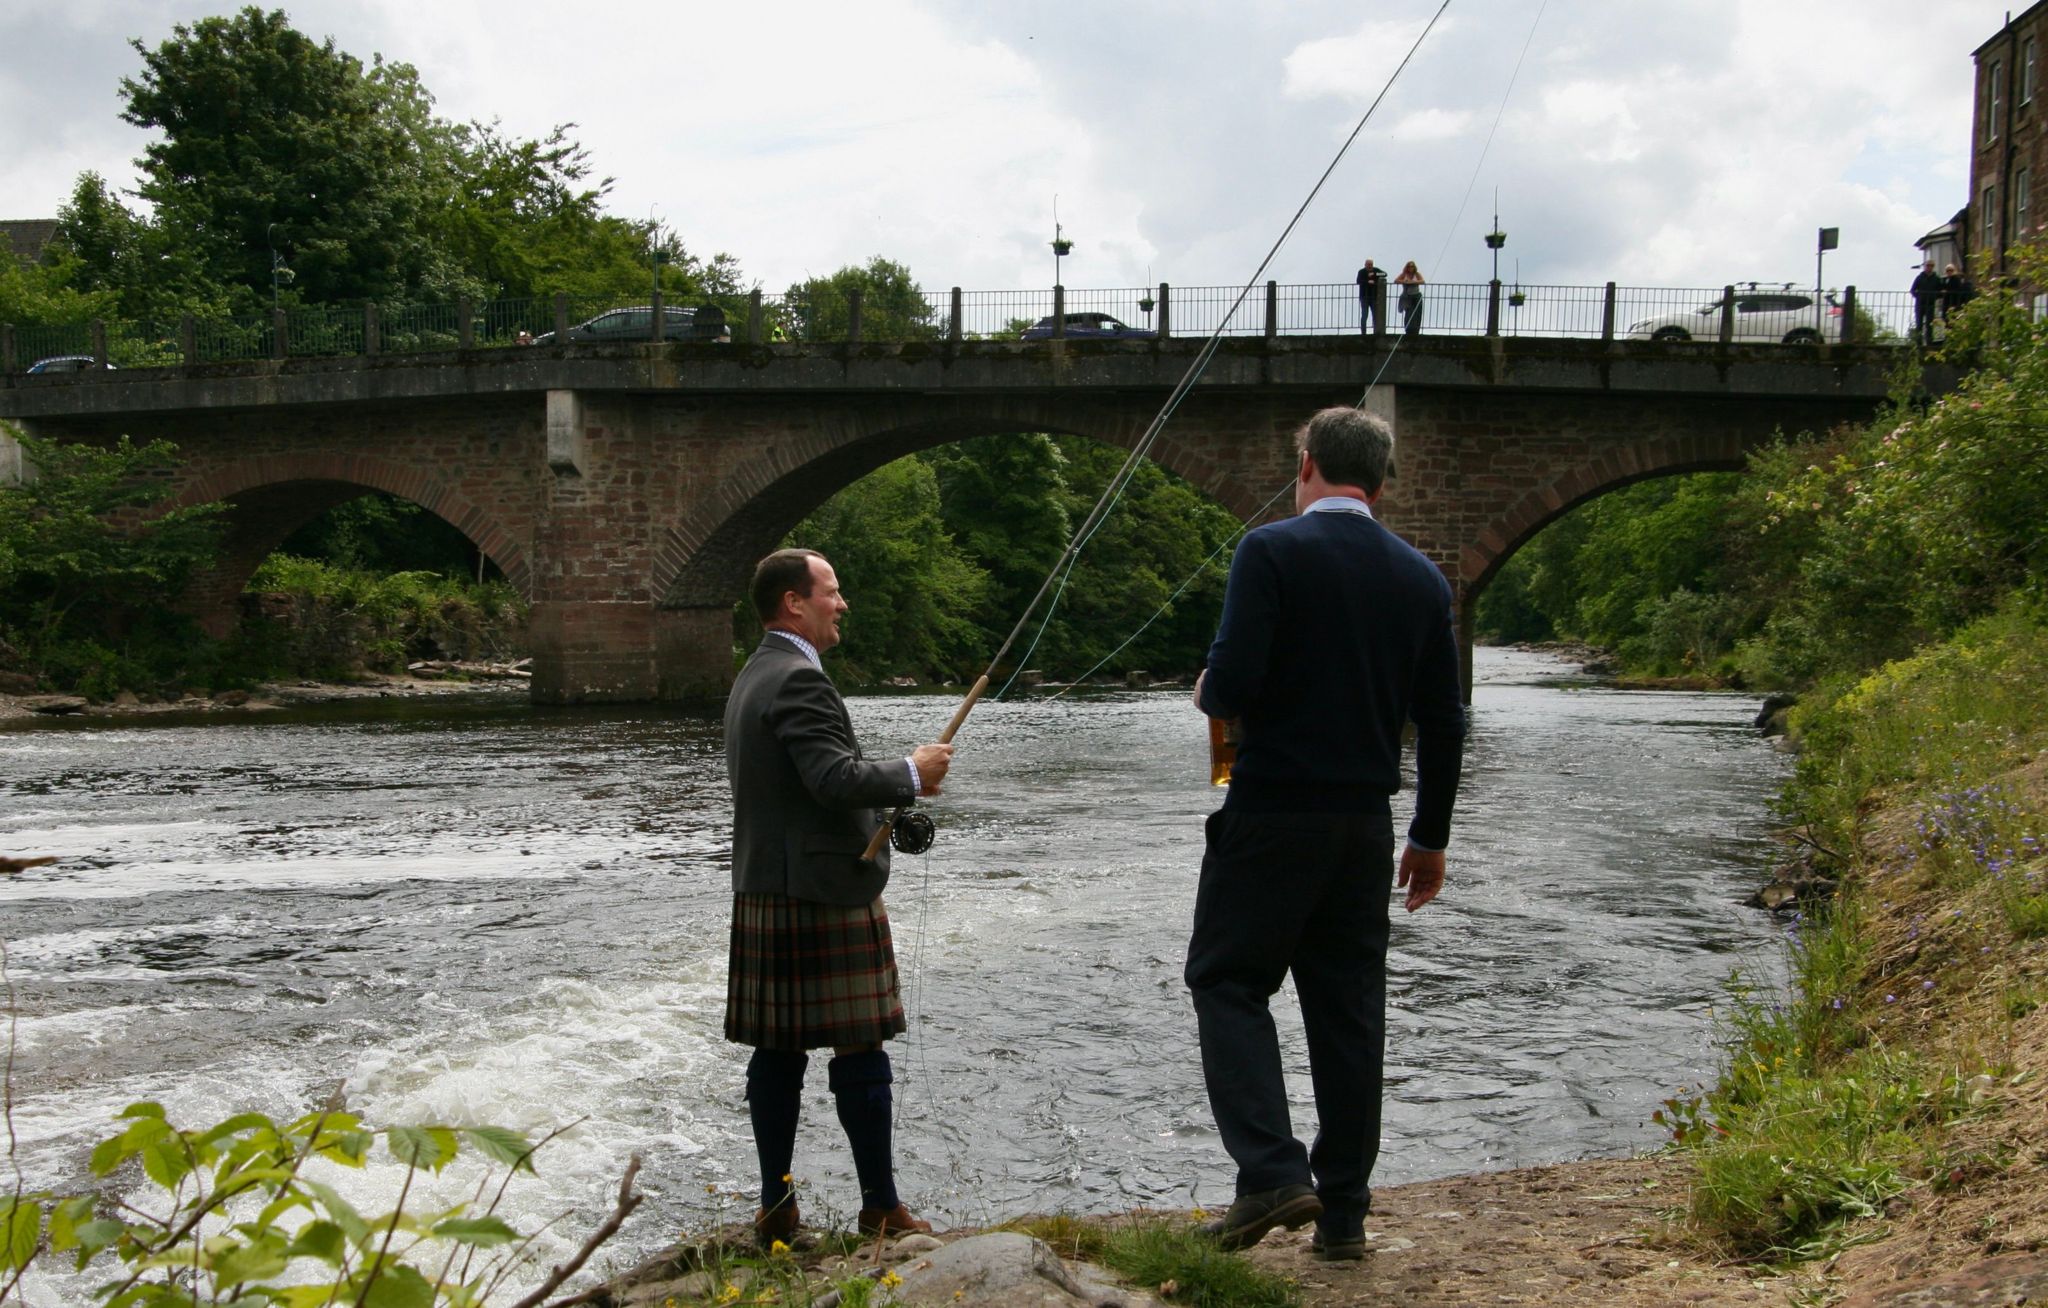 Jamie Macpherson of Macpherson Fishing takes the first ceremonial cast after the stretch of river was handed over